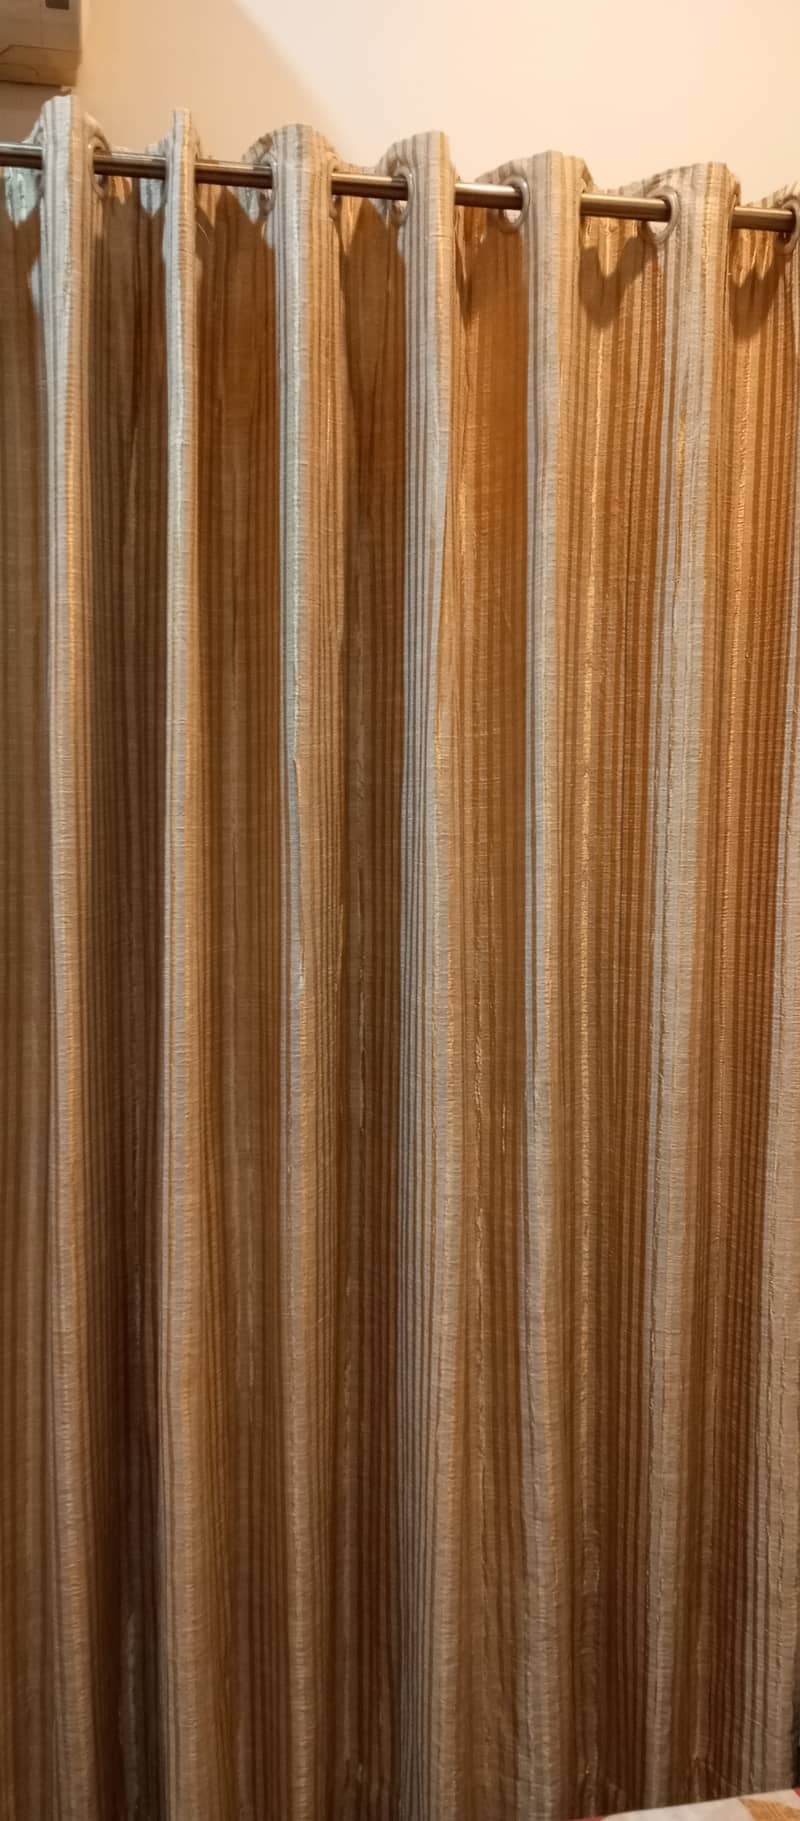 Bedroom curtains 1